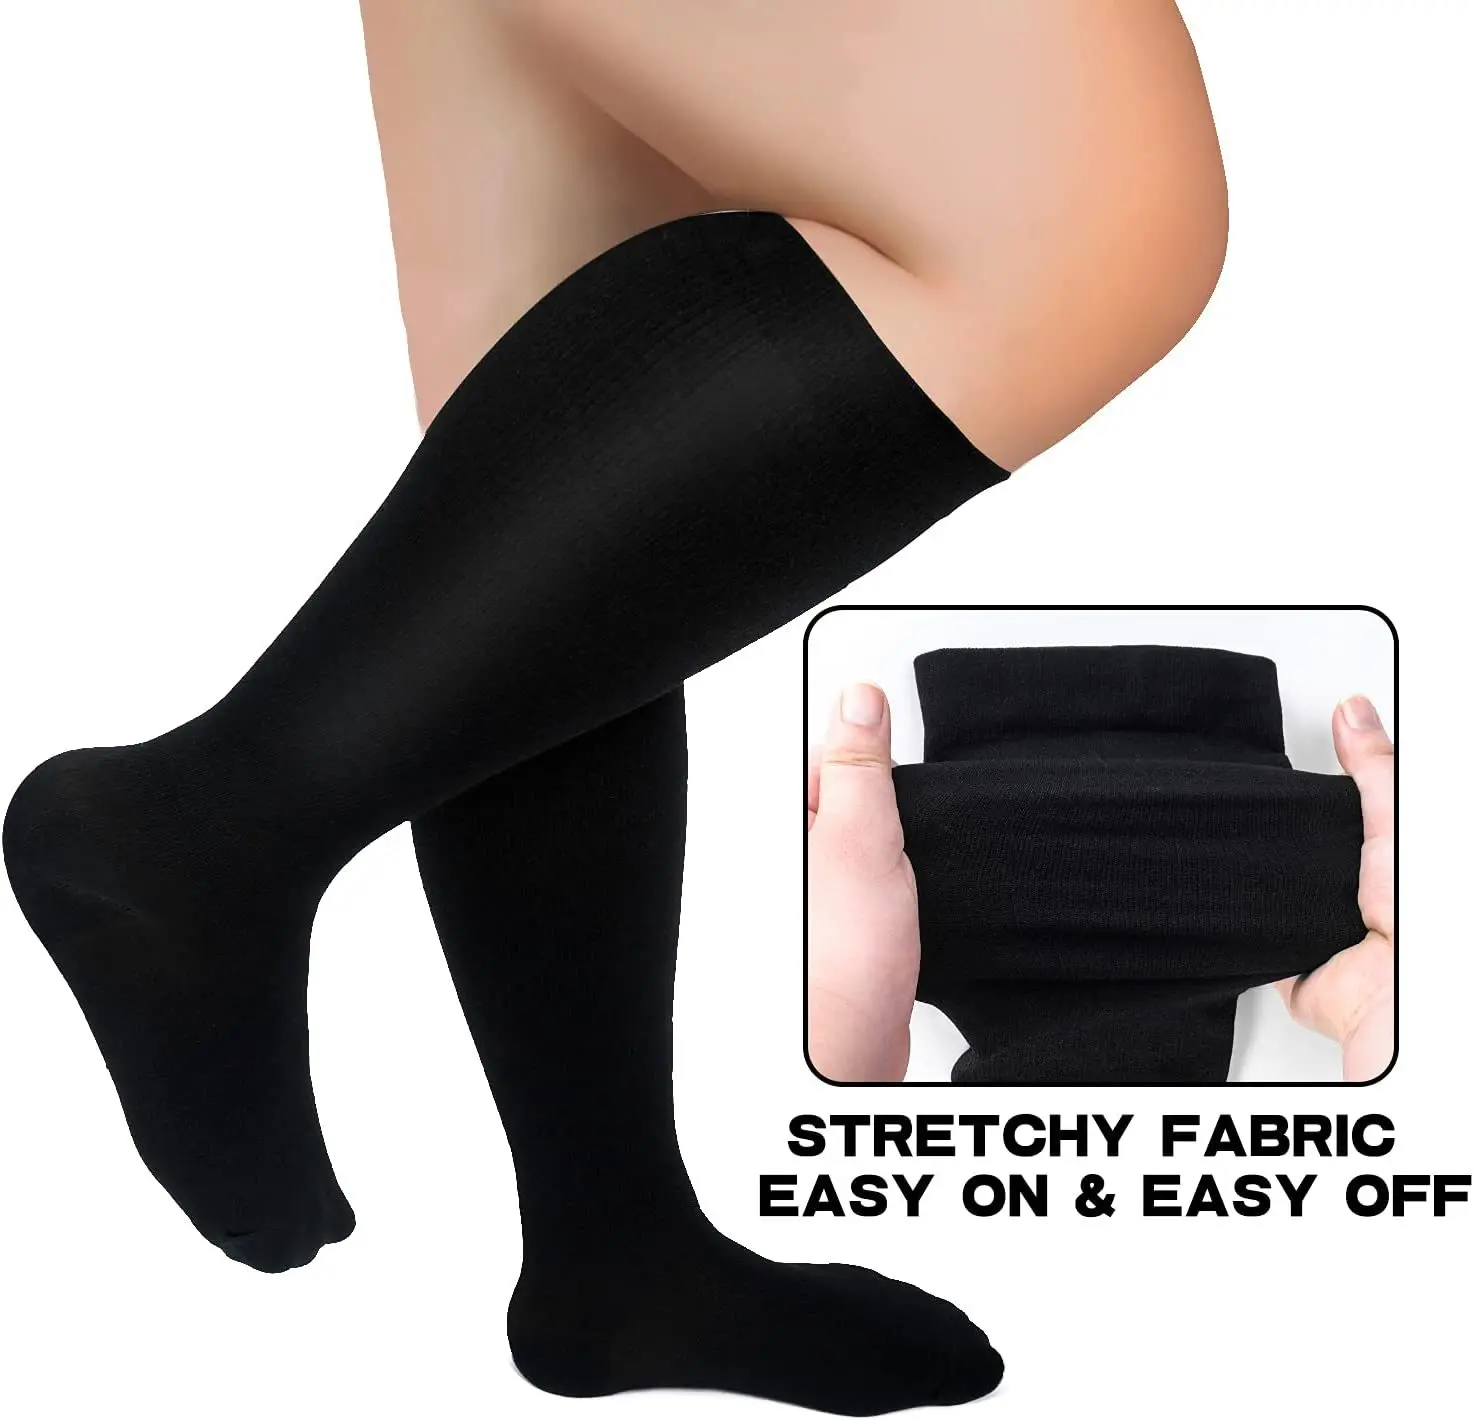 Wide Calf Compression Socks for Women & Men 20-30 mmhg Extra Large Size Support Socks for Nurses Knee High Stockings 2XL 3XL 4XL